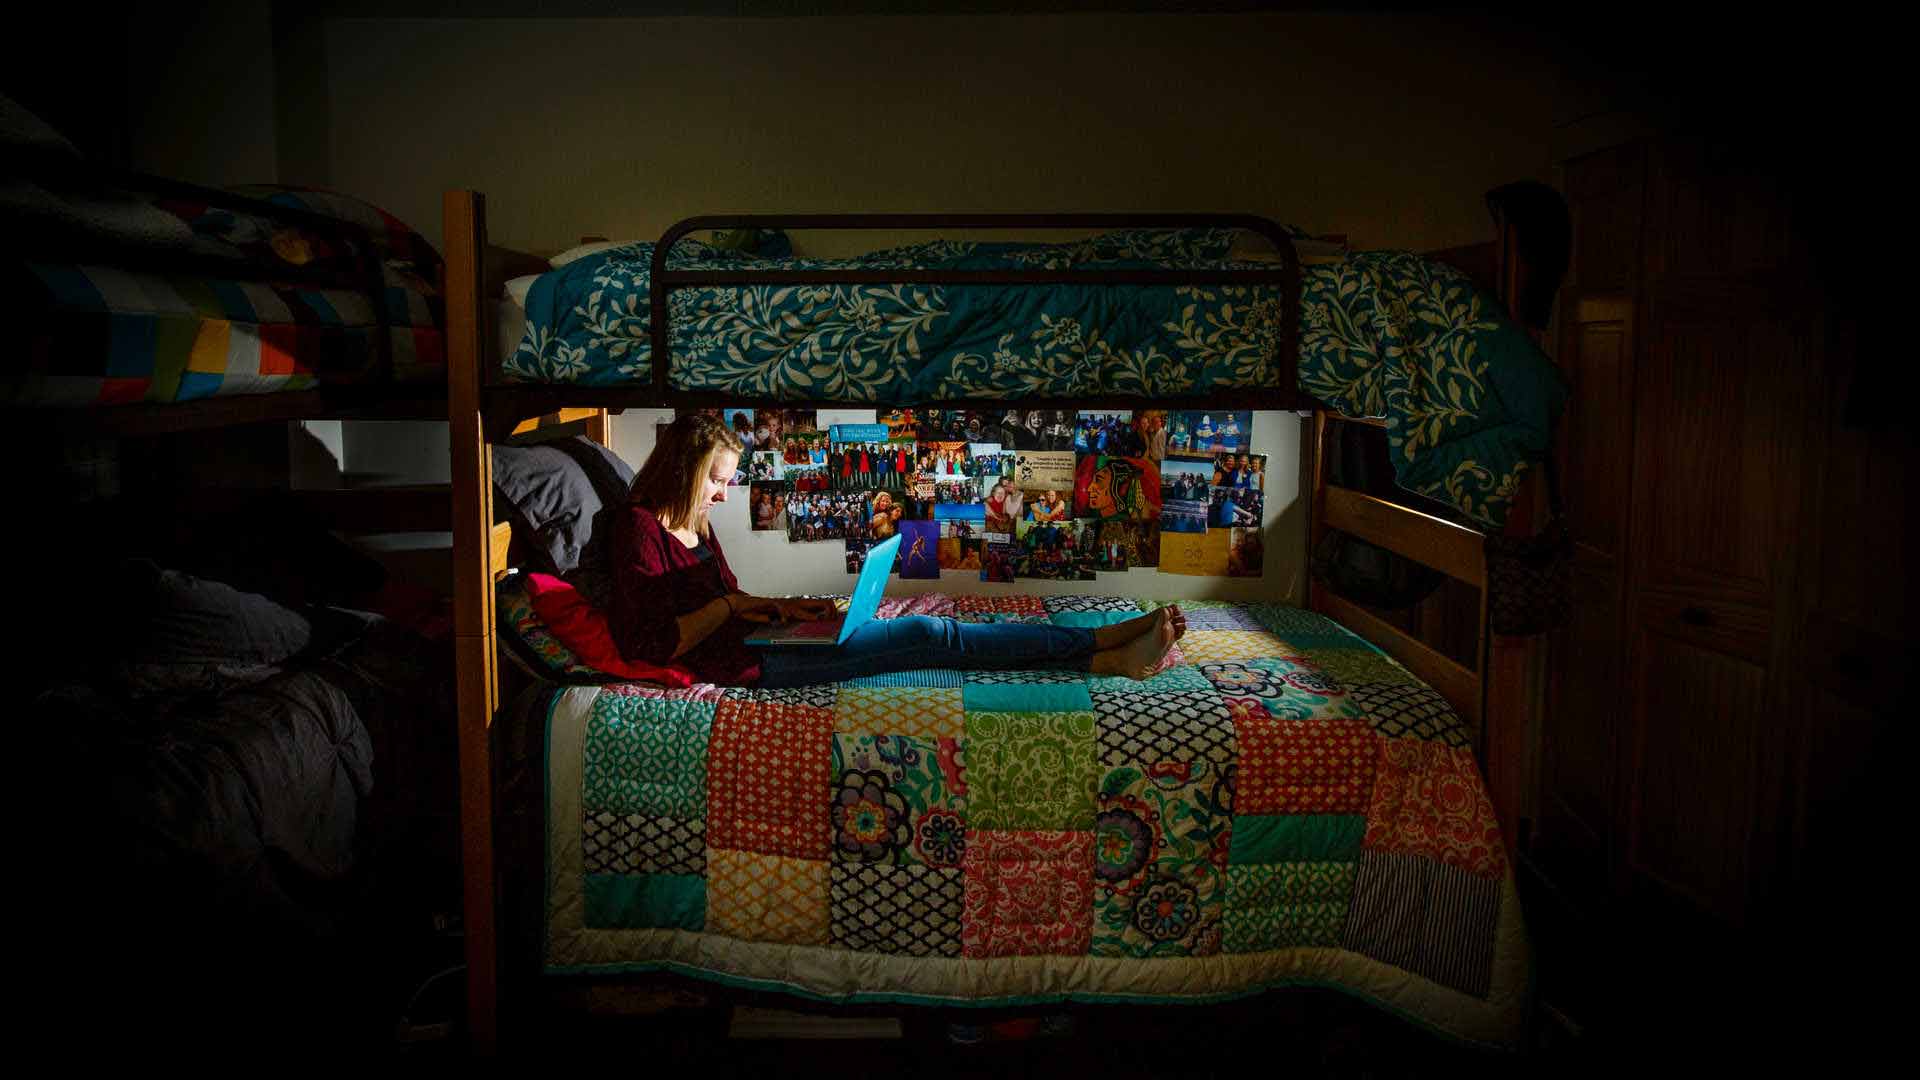 student works on laptop on the bottom bunk